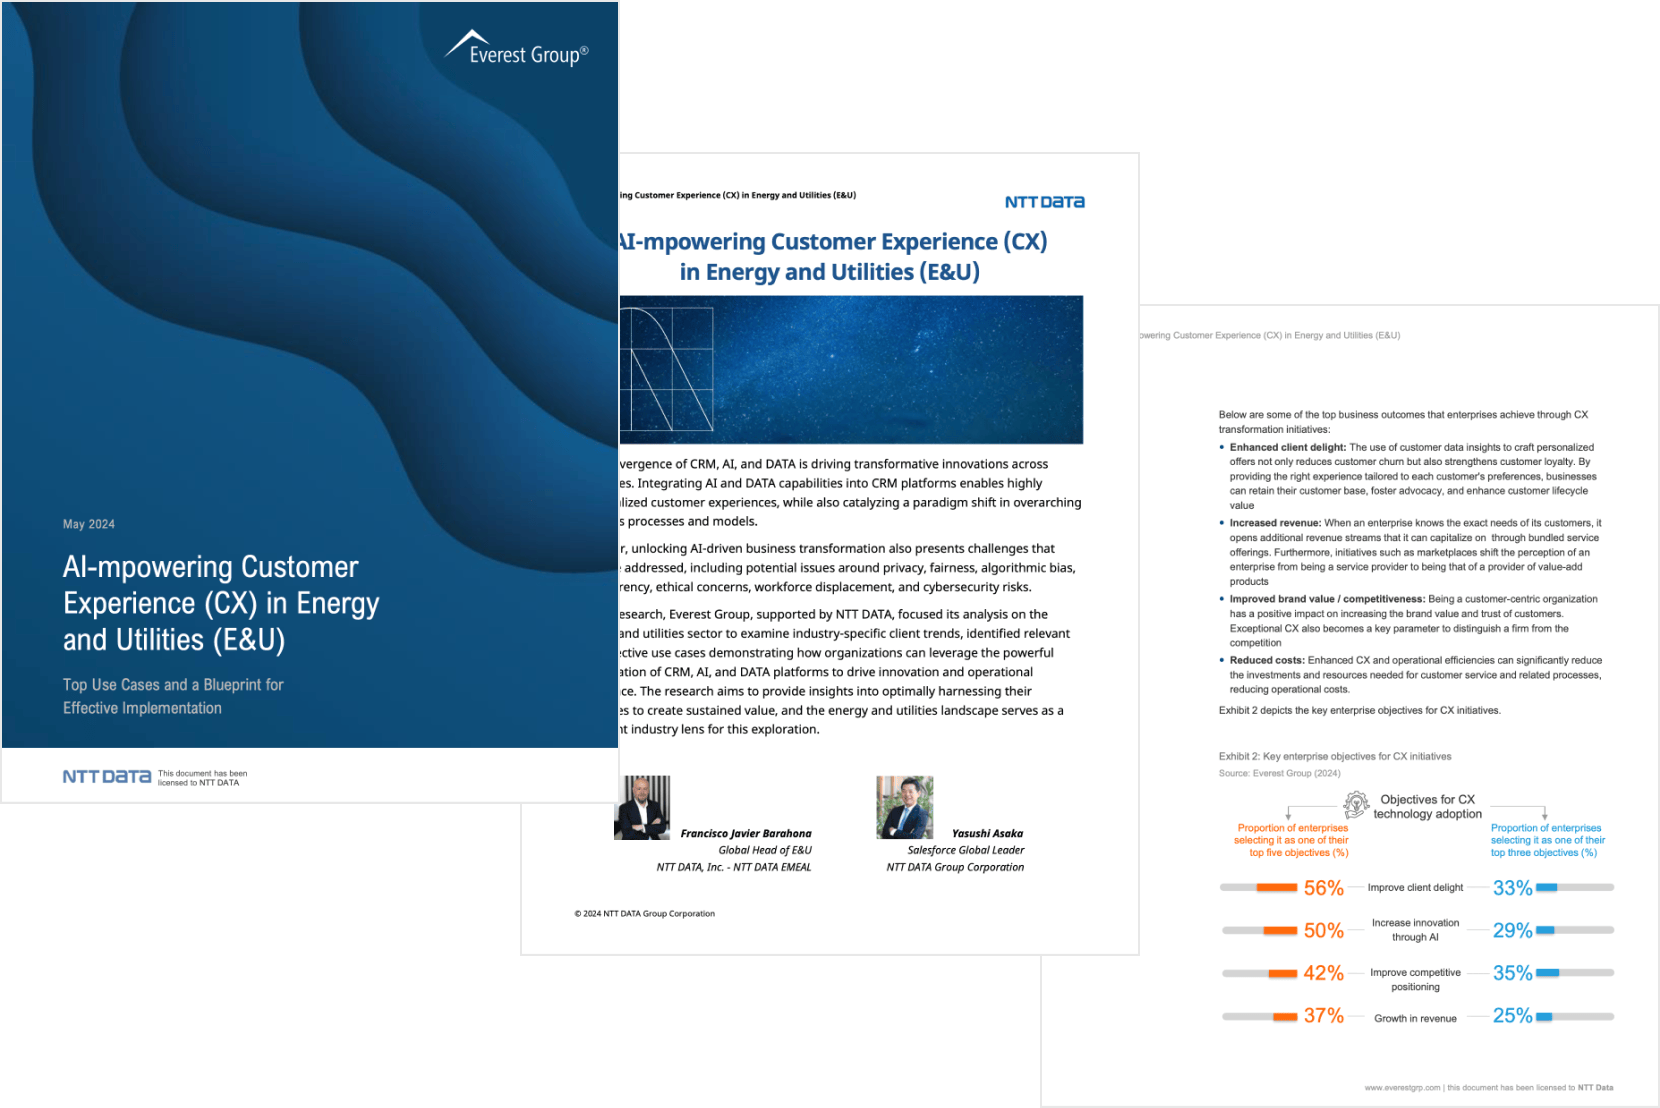 AI-powering Customer Experience (CX) in Energy and Utilities (E&U)